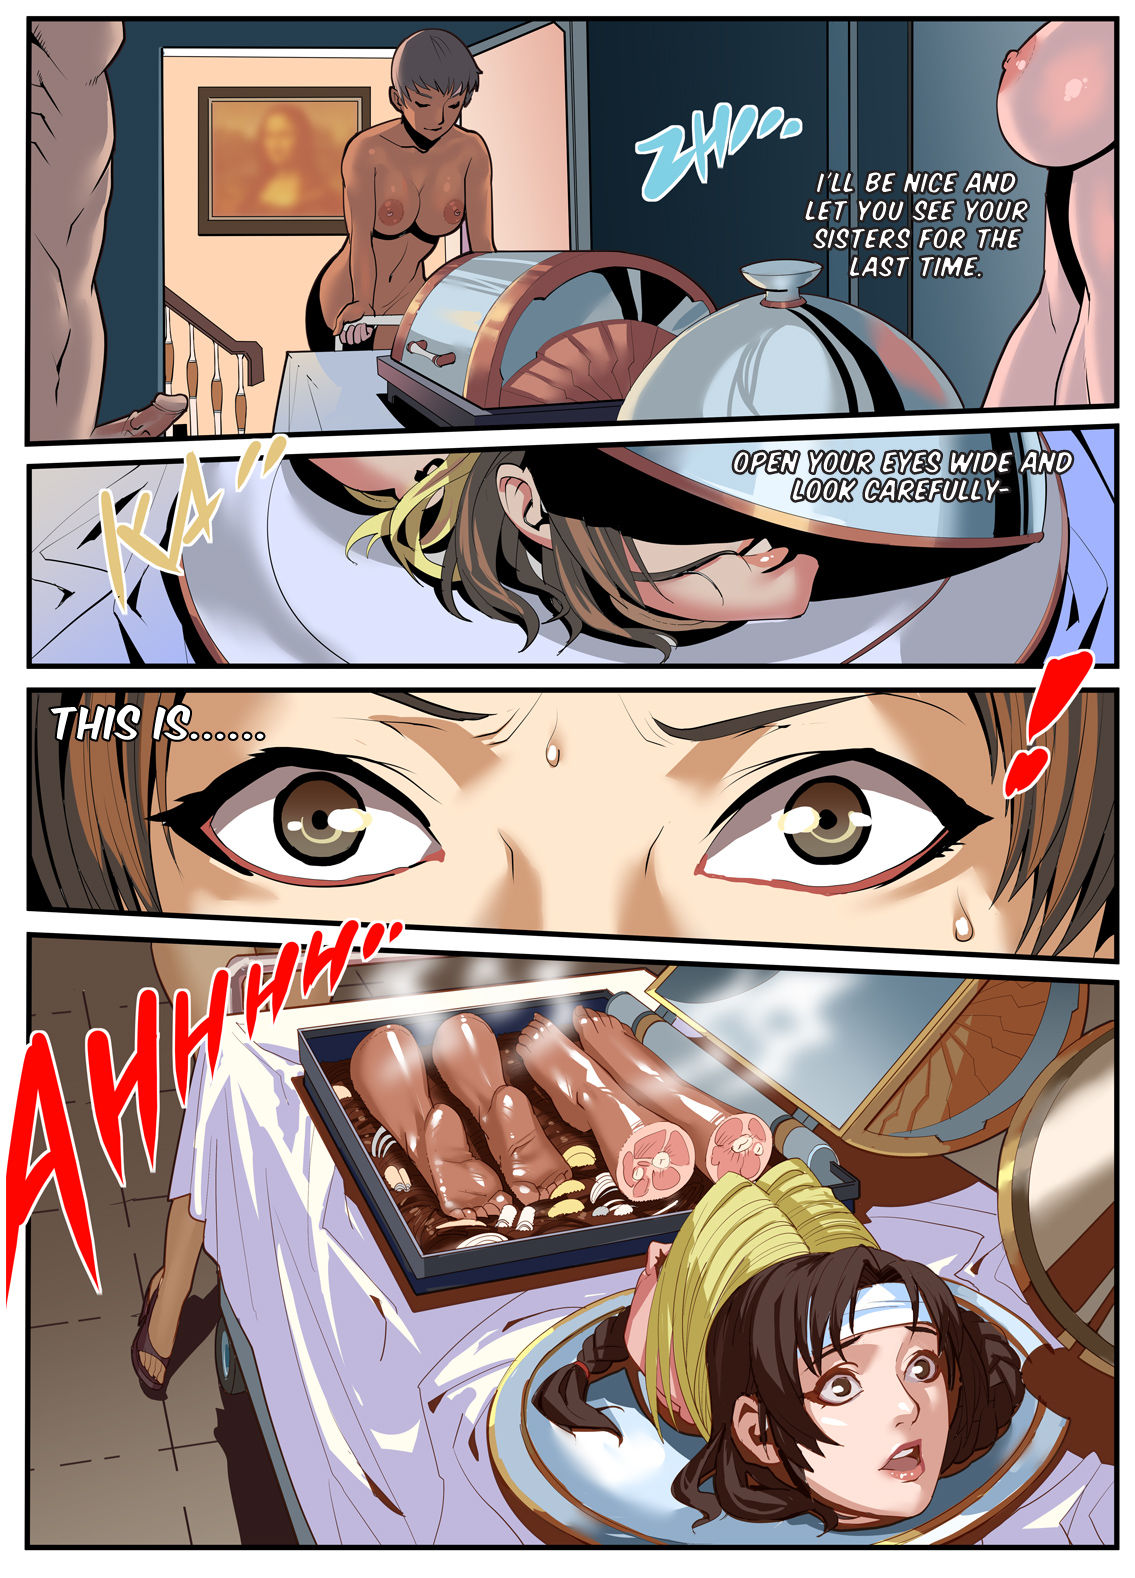 [chunlieater] The Lust of Mai Shiranui (King of Fighters) [English] [Yorkchoi & Twist] page 47 full